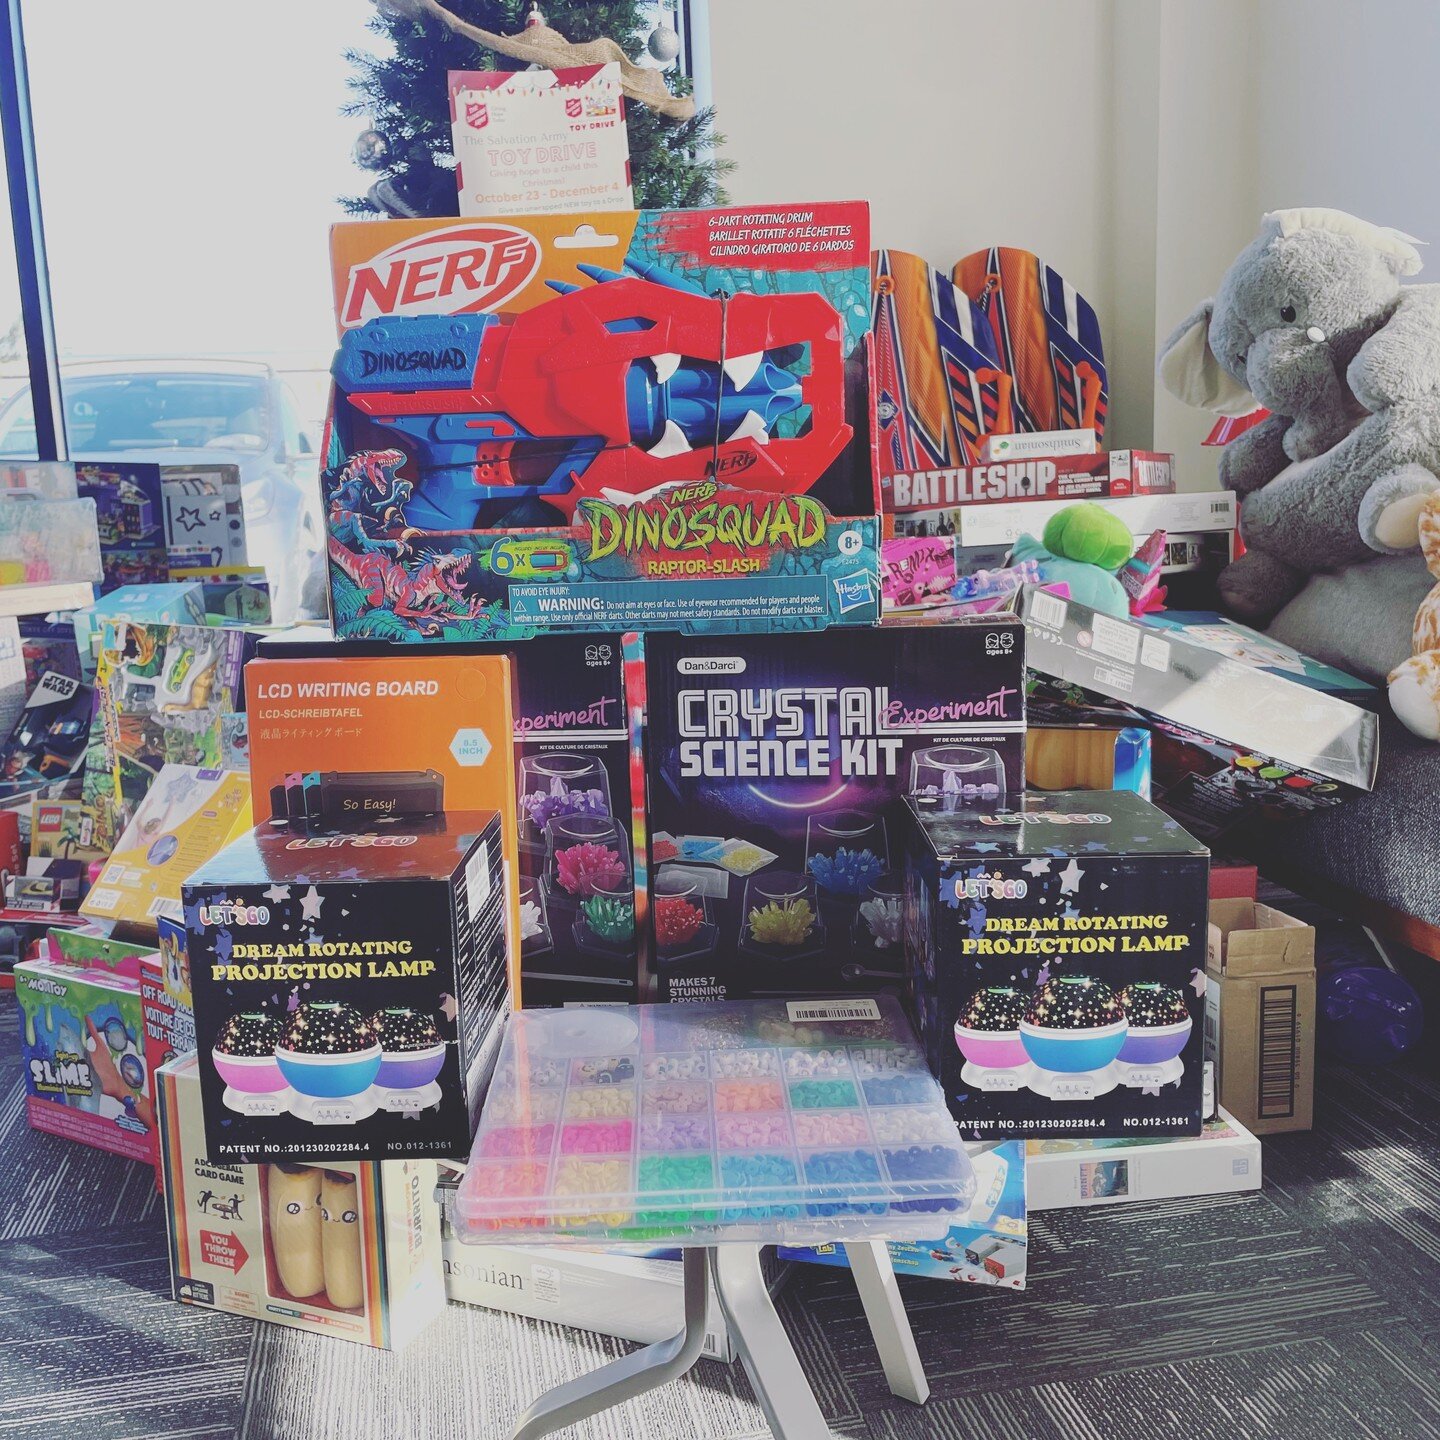 🌟✨ A Beacon of Light in Halifax! 💡🎁 We are thrilled to share some heartwarming news - @creelightingofficial and @tremblaycharlesantoine has joined hands with us to illuminate the lives of dozen families in Halifax through our Toy Drive! 🚚🧸🎄

Th